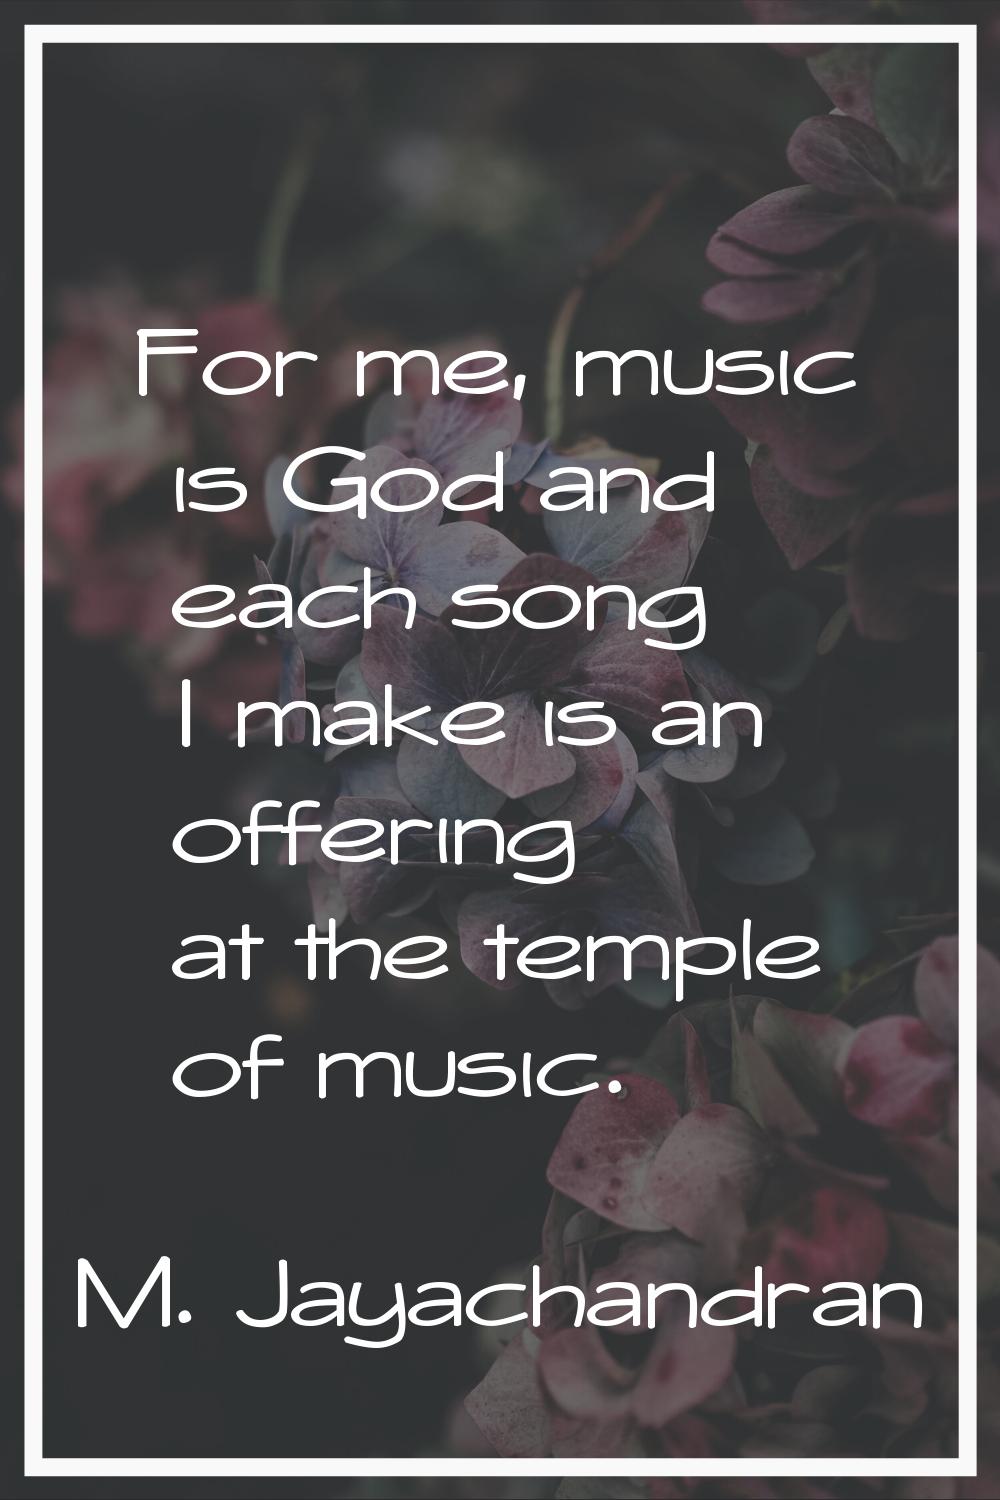 For me, music is God and each song I make is an offering at the temple of music.